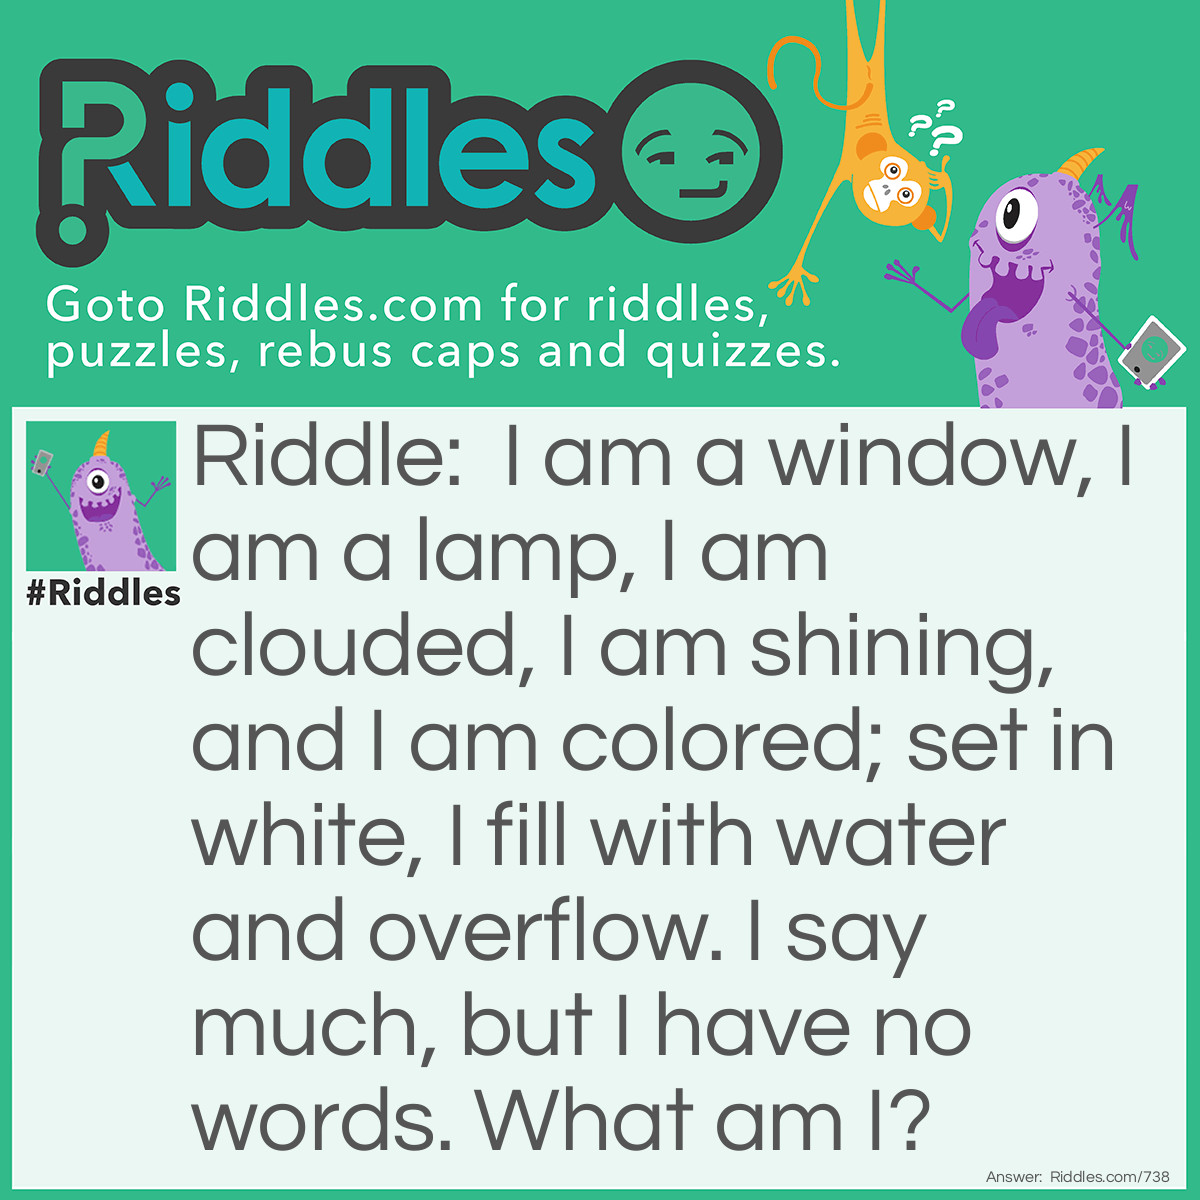 Riddle: I am a window, I am a lamp, I am clouded, I am shining, and I am colored; set in white, I fill with water and overflow. I say much, but I have no <a href="https://www.riddles.com/quiz/words">words</a>. What am I? Answer: I am an eye.